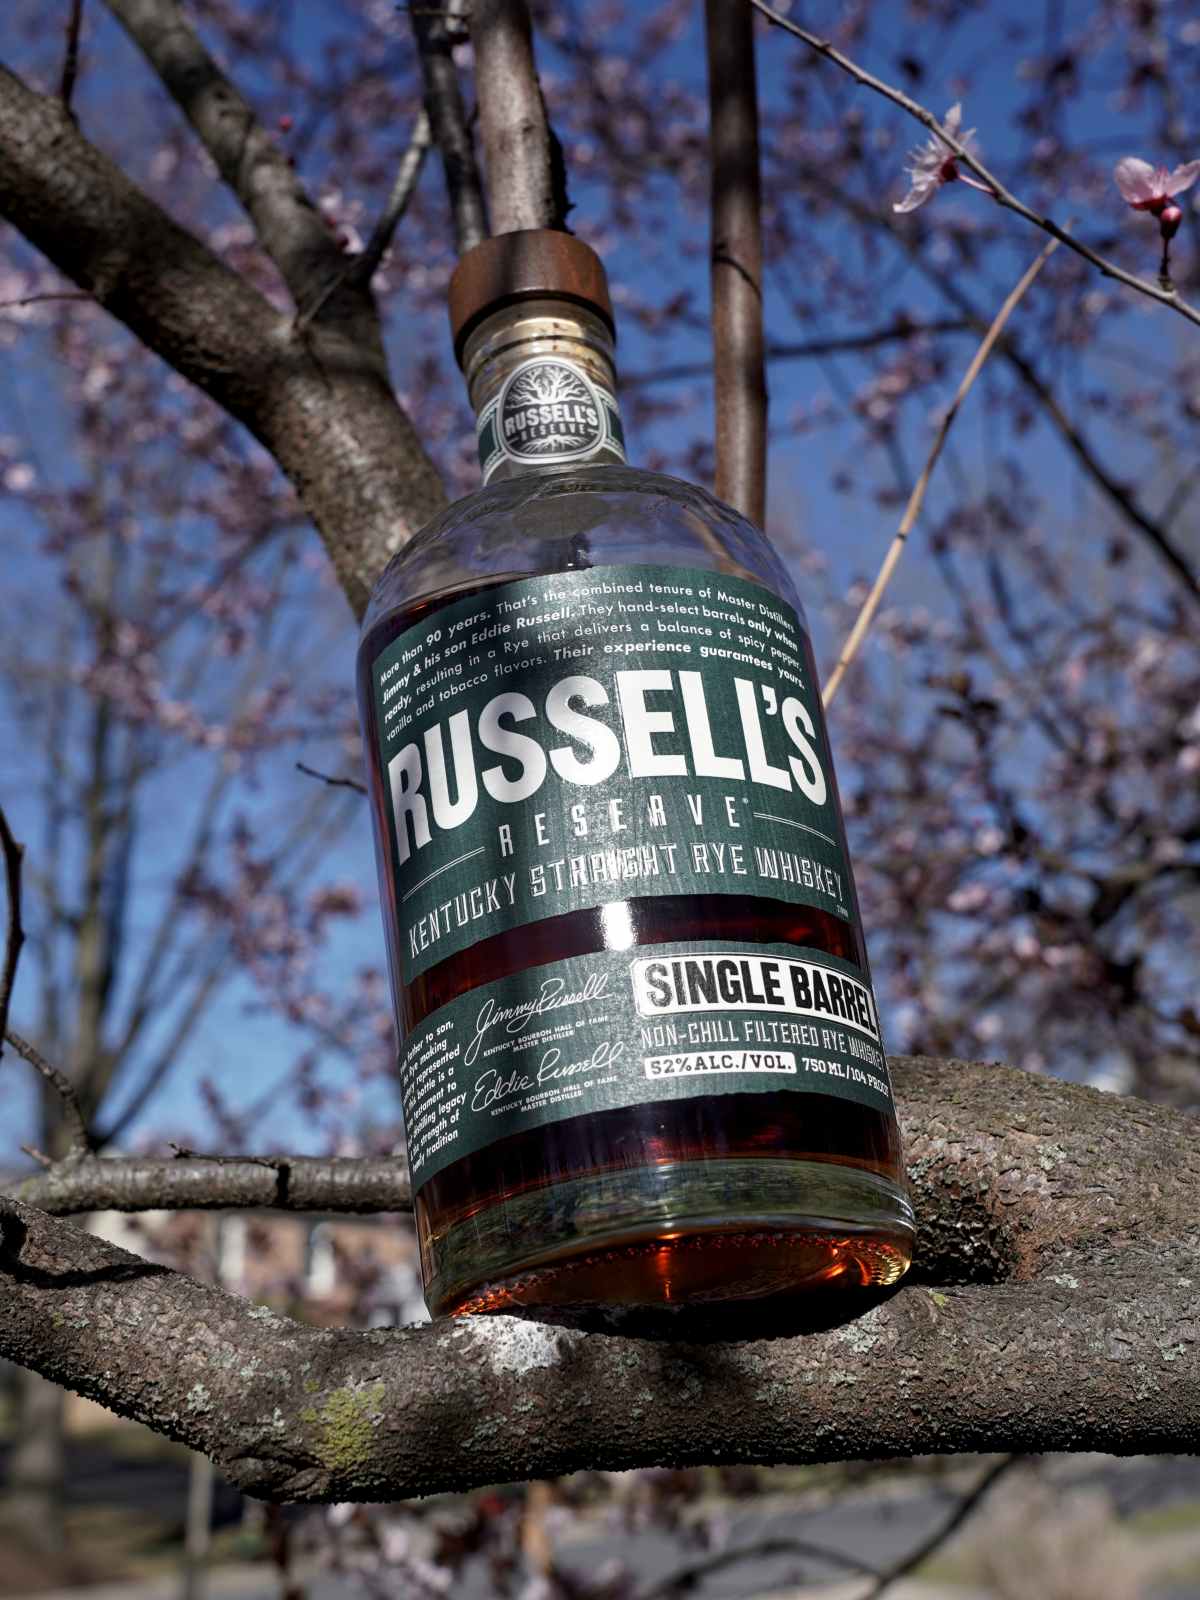 Russell’s Reserve Single Barrel rye featured